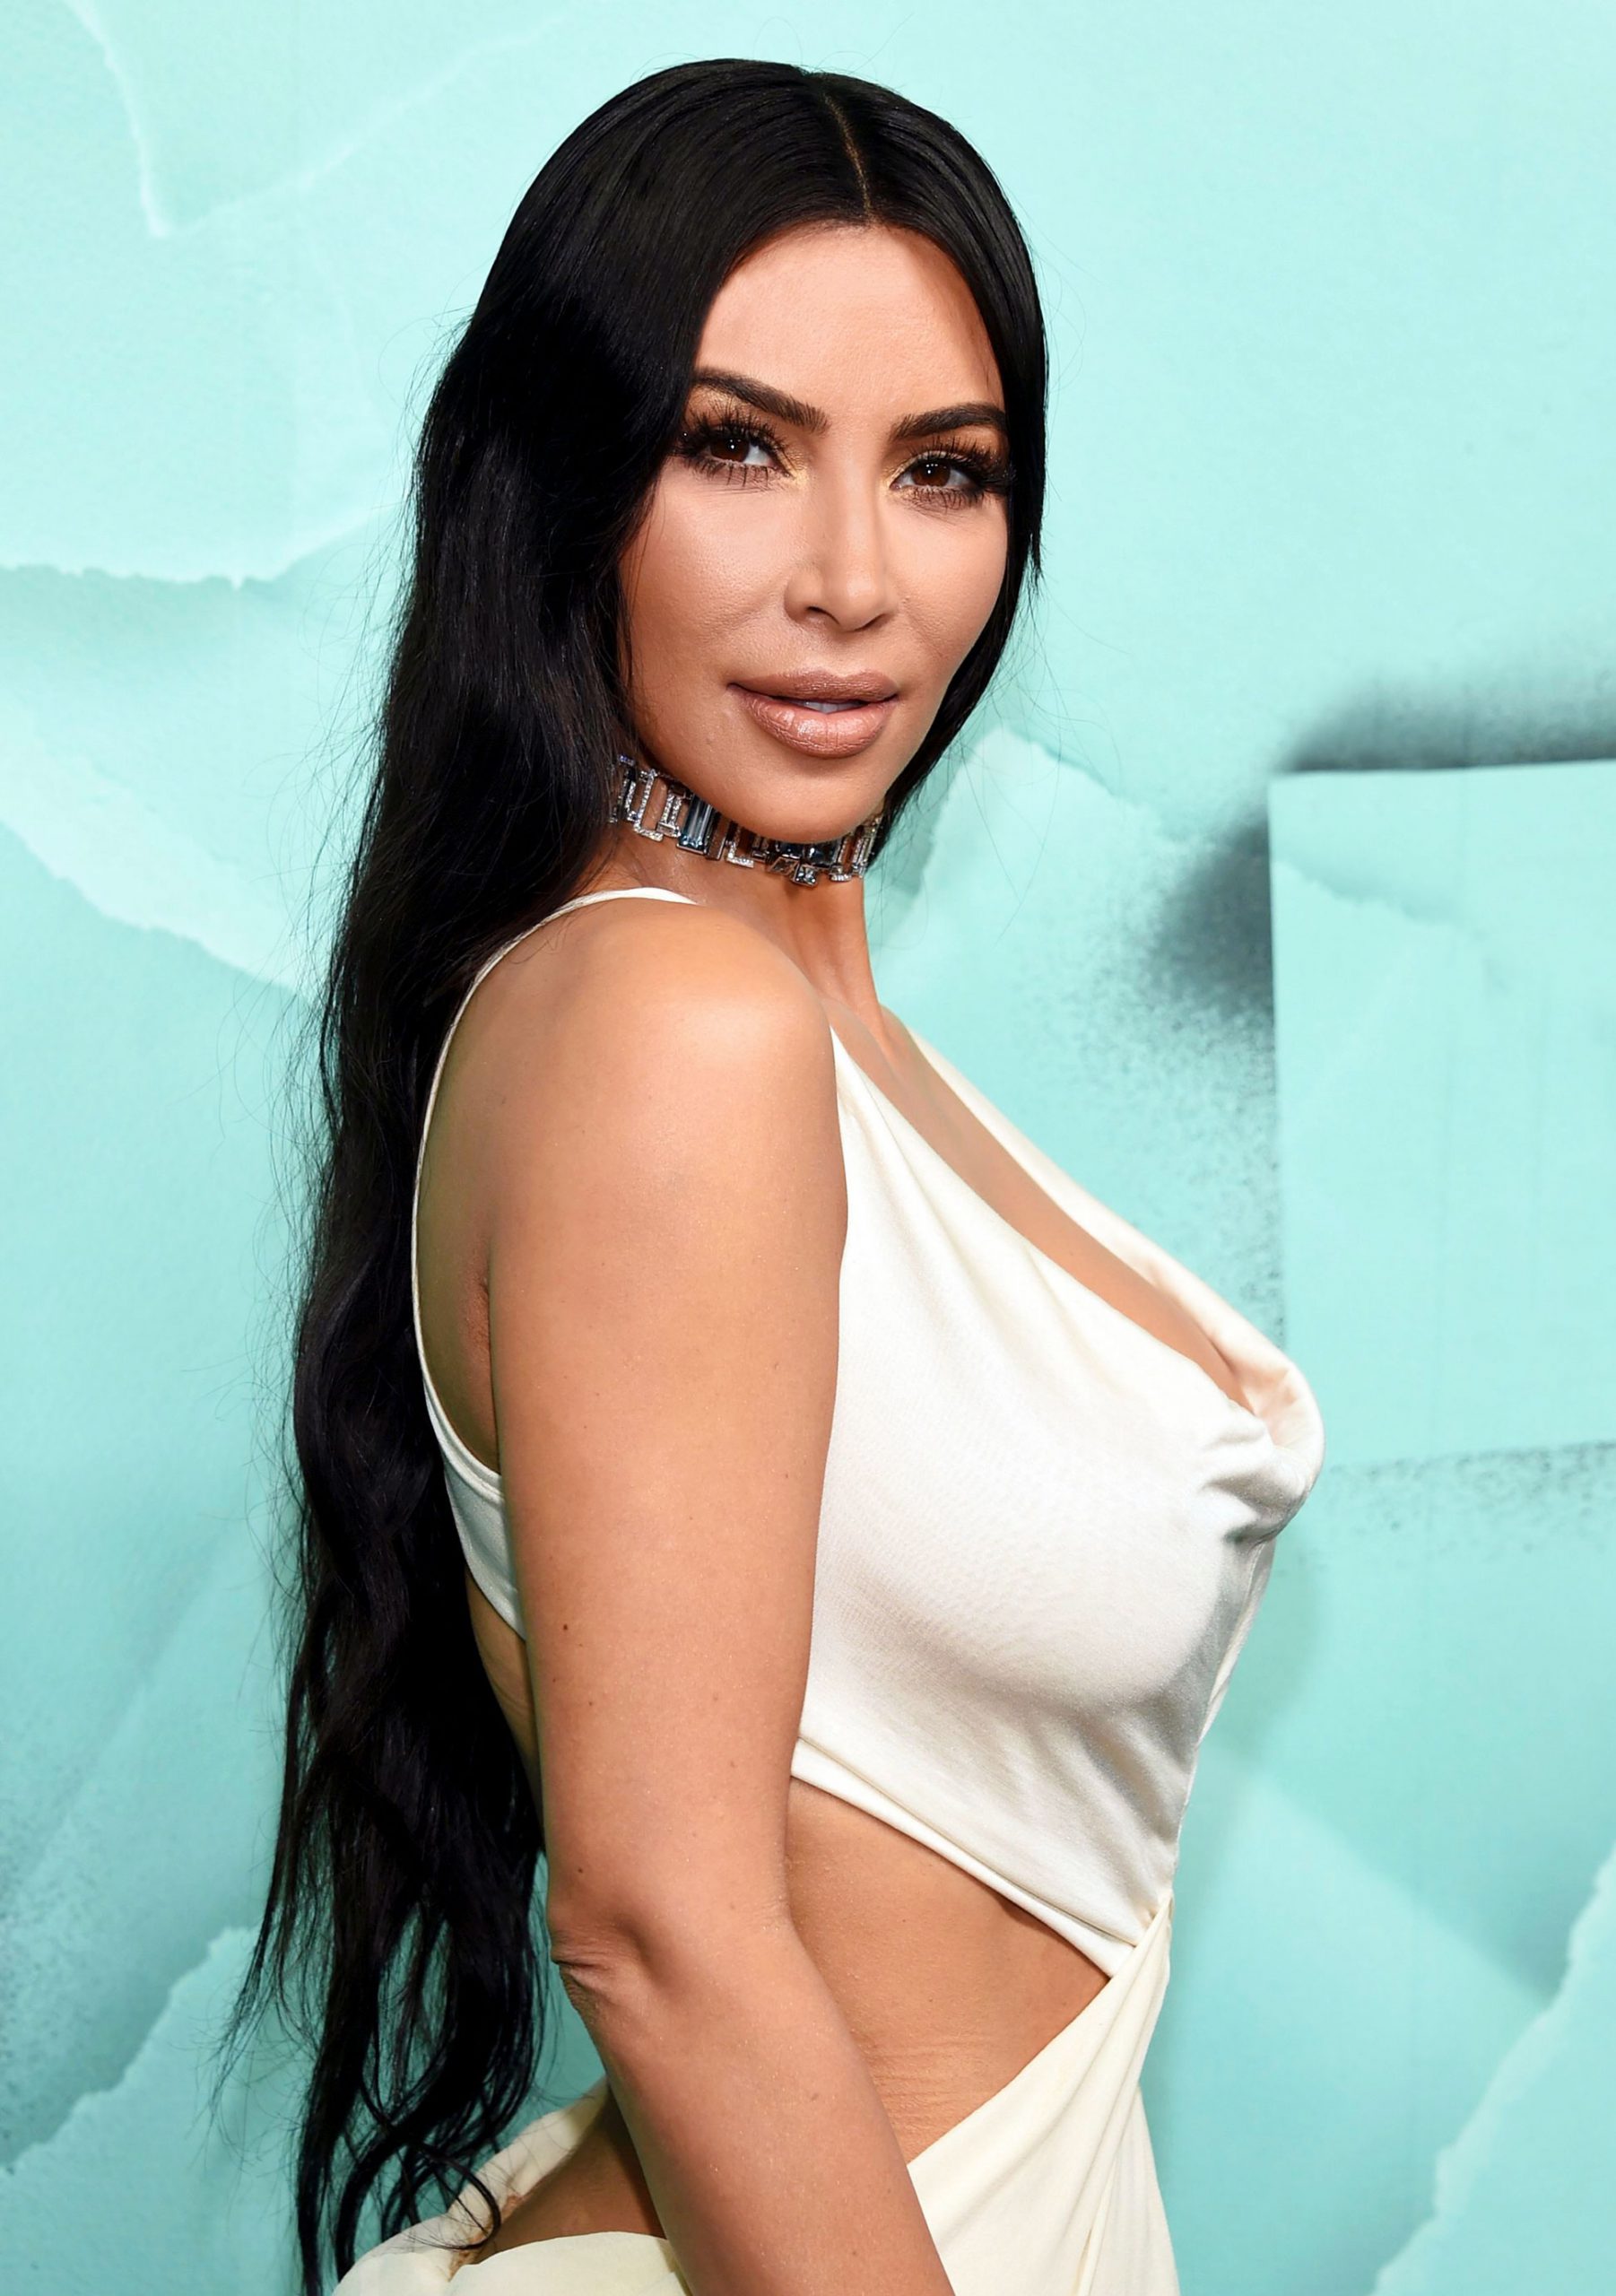 Kim Kardashian Workout Clothes: Details about the Eye Popping Gym Outfit!